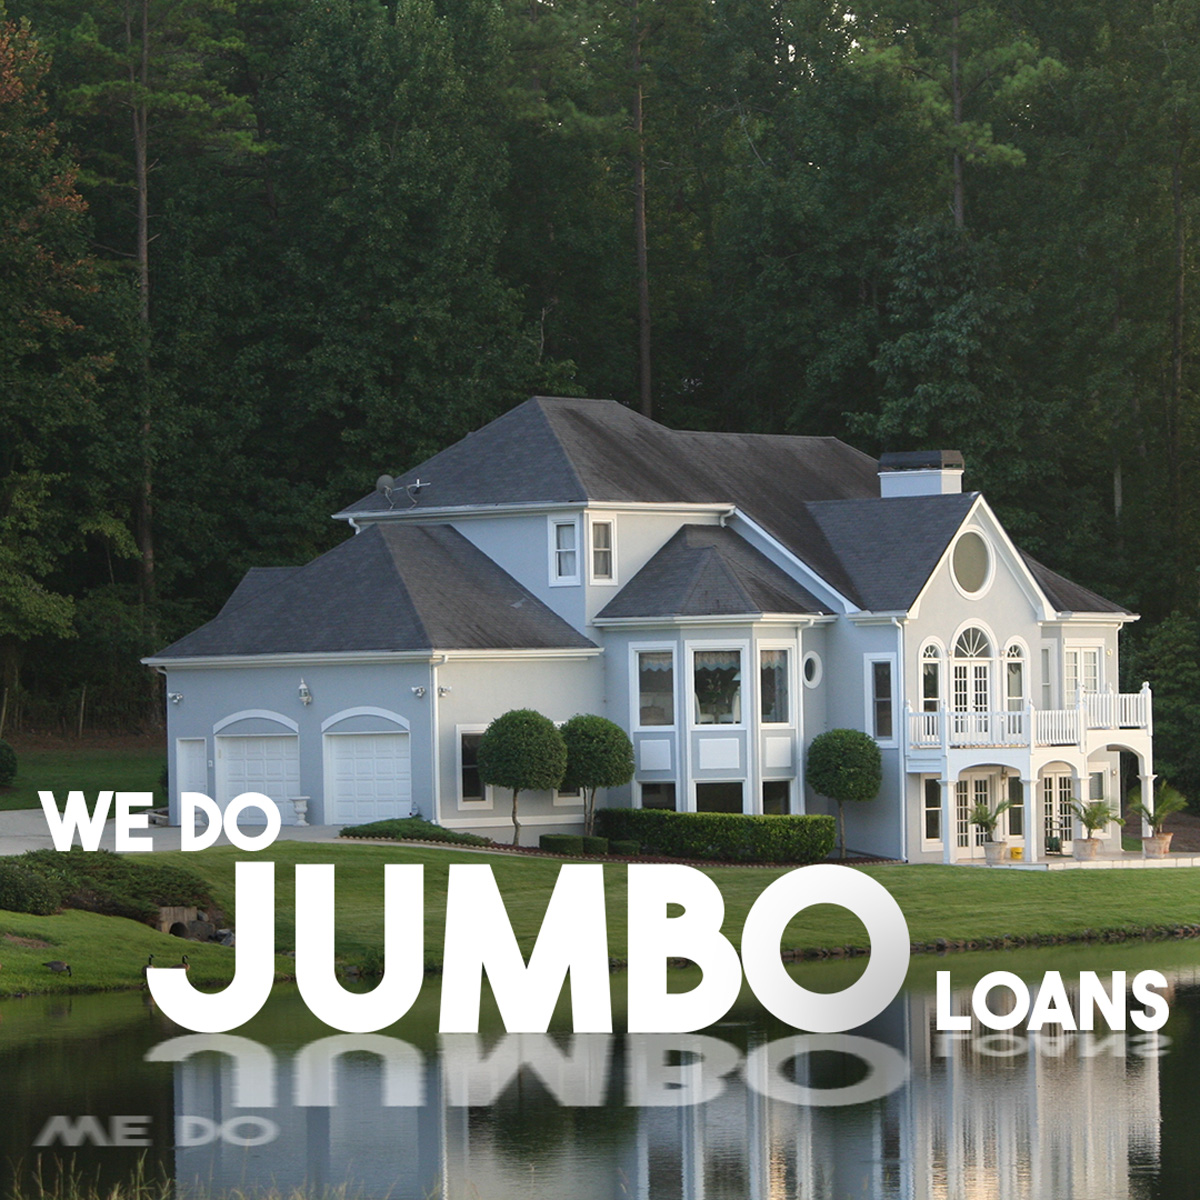 We go over and above for oversized loans! Reach out to us today to see your options for jumbo loans.